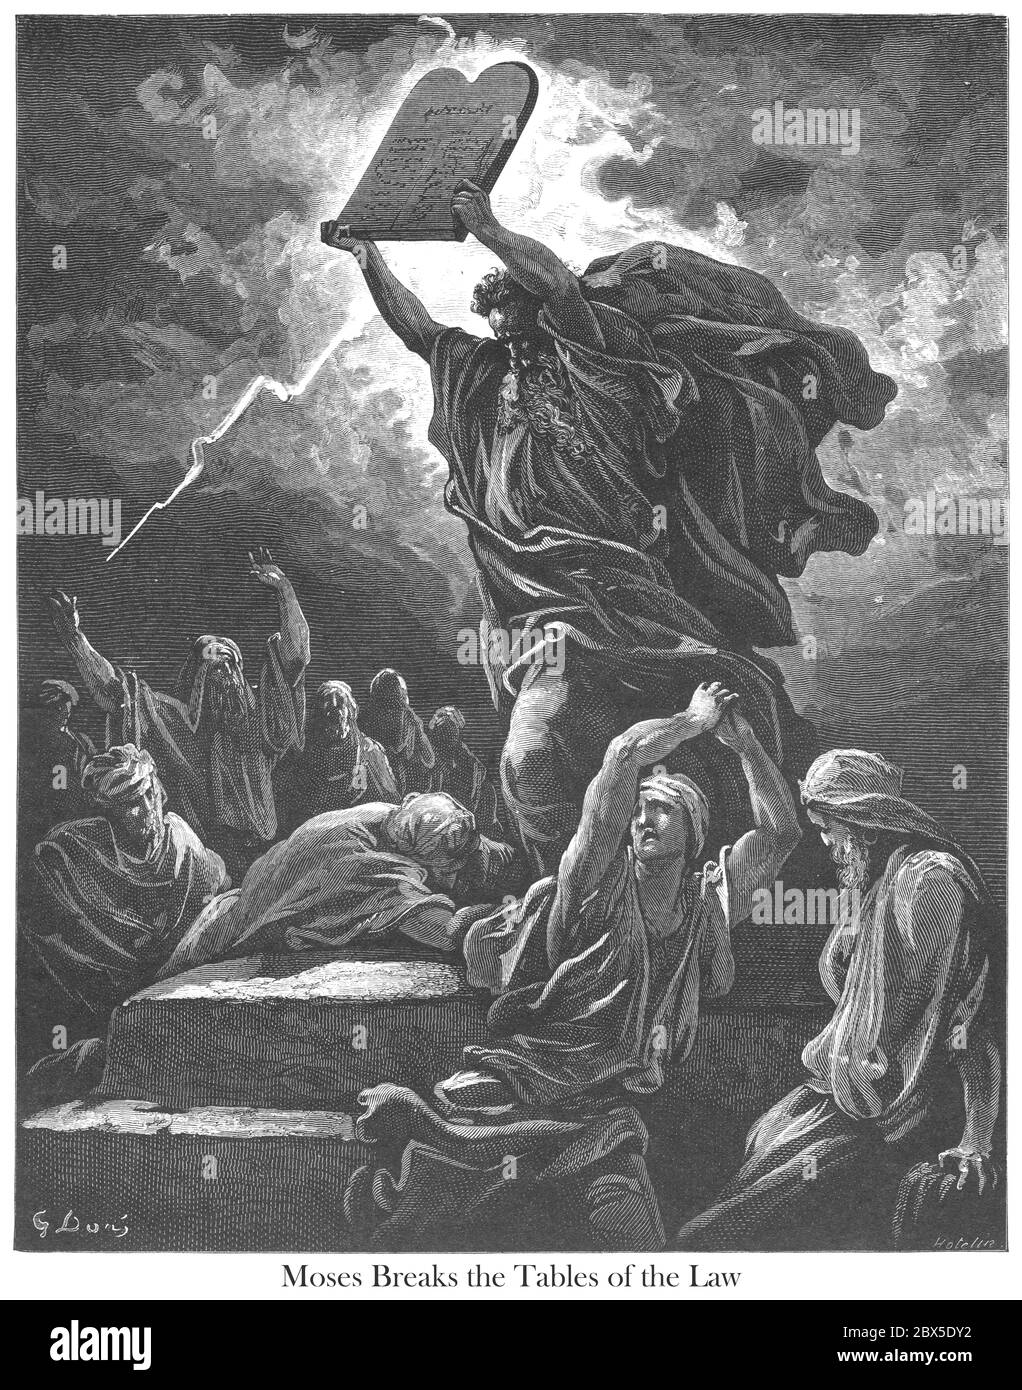 Moses Breaking the Tables of the Law Exodus 32:19 From the book 'Bible Gallery' Illustrated by Gustave Dore with Memoir of Dore and Descriptive Letter-press by Talbot W. Chambers D.D. Published by Cassell & Company Limited in London and simultaneously by Mame in Tours, France in 1866 Stock Photo